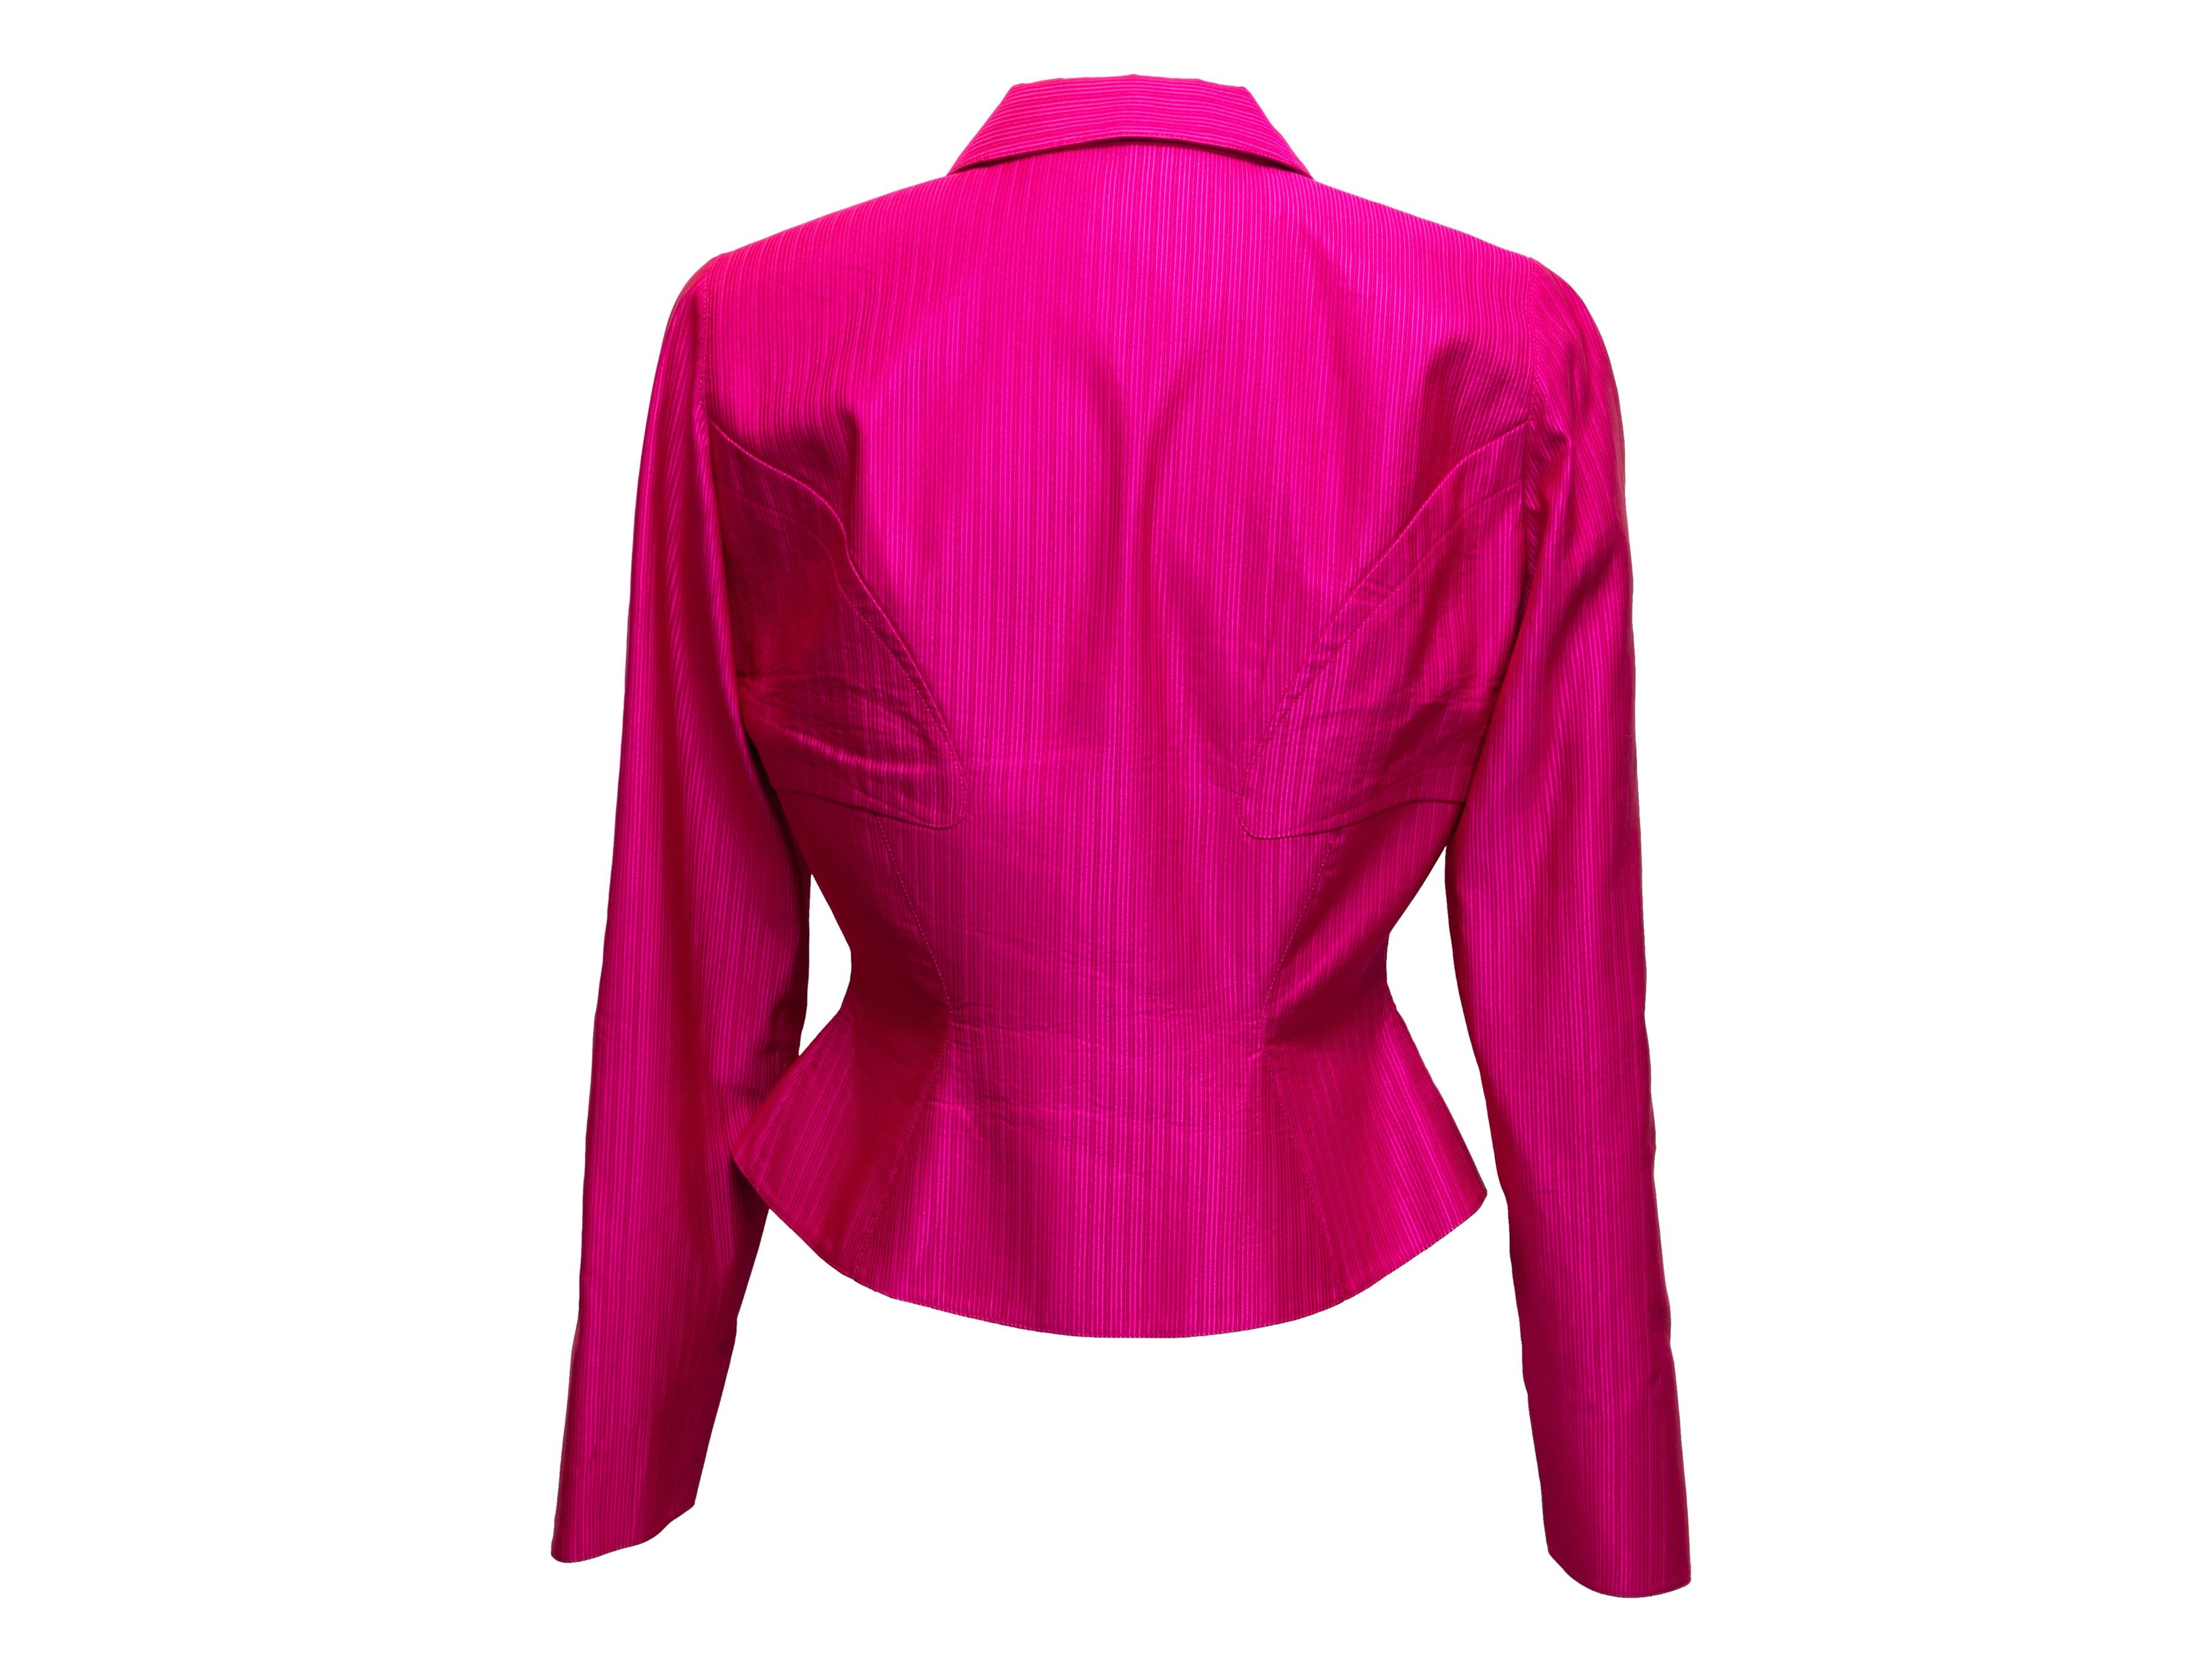 Vintage fuchsia pinstripe cropped silk-blend blazer by Thierry Mugler. Notched lapel. Front button closures. 36